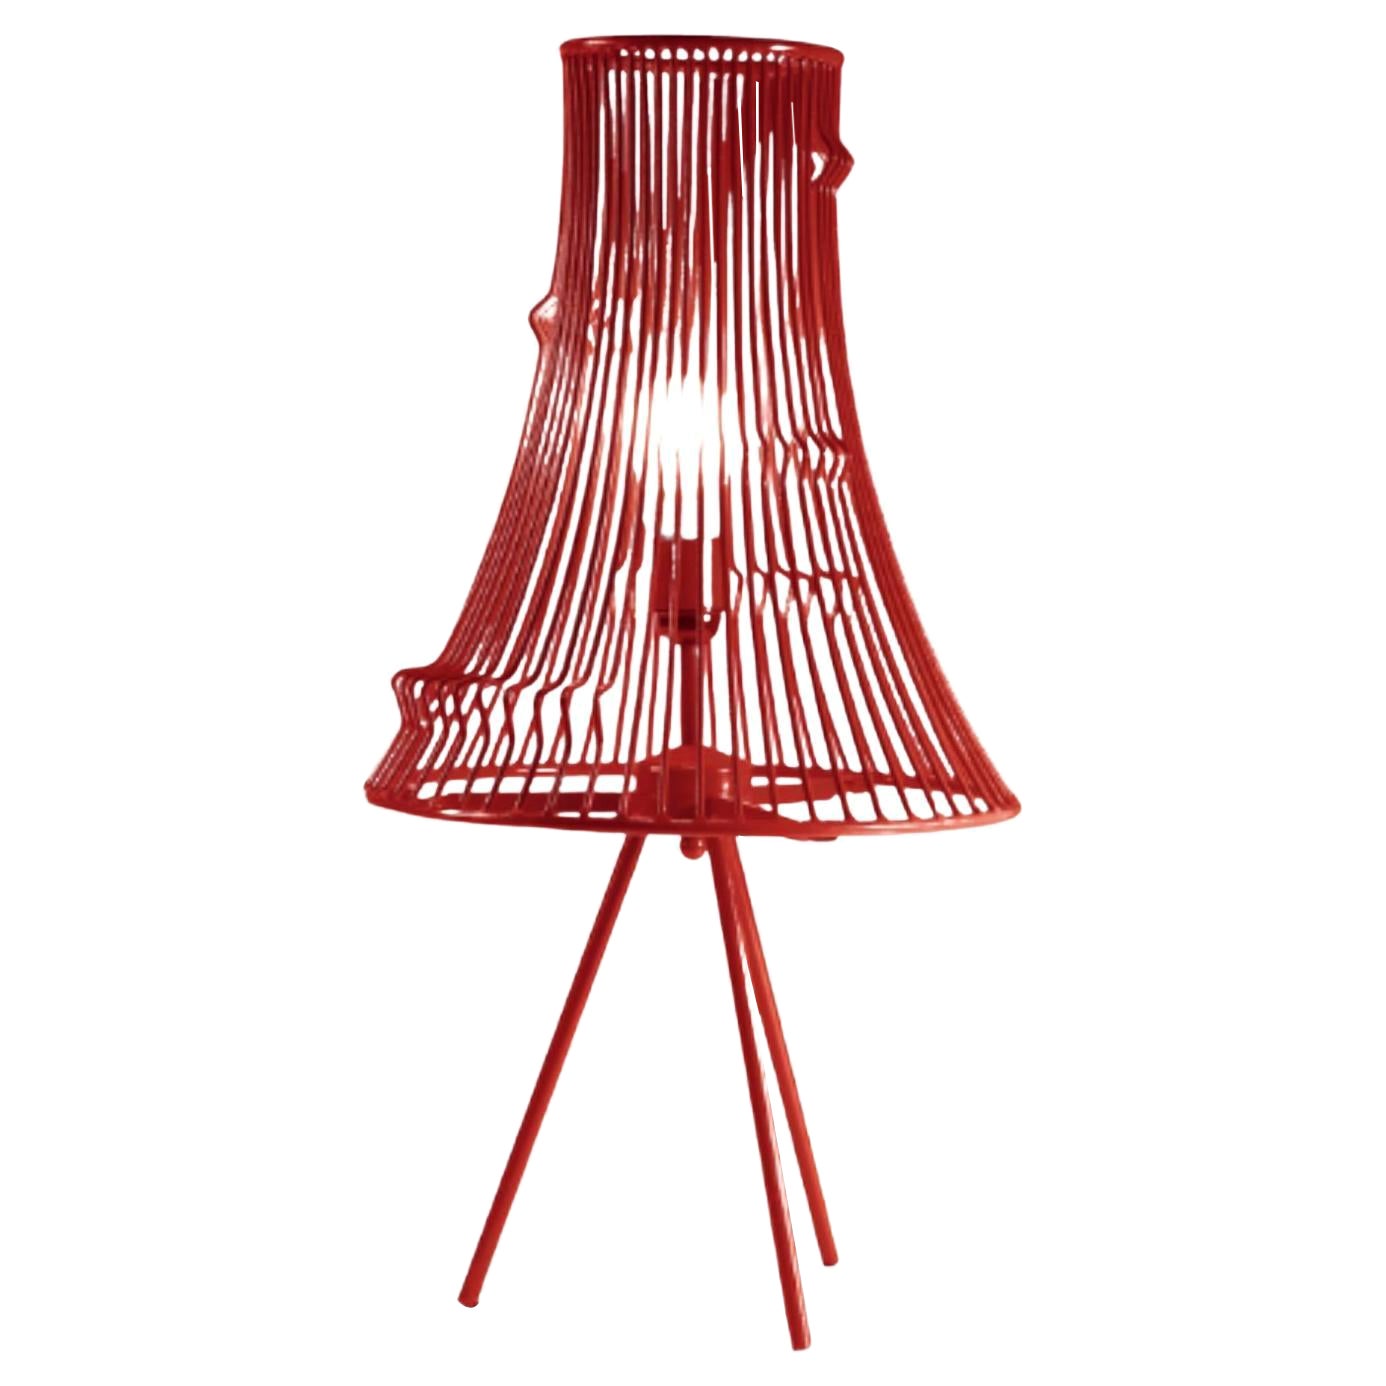 Lipstick Extrude Table Lamp by Dooq